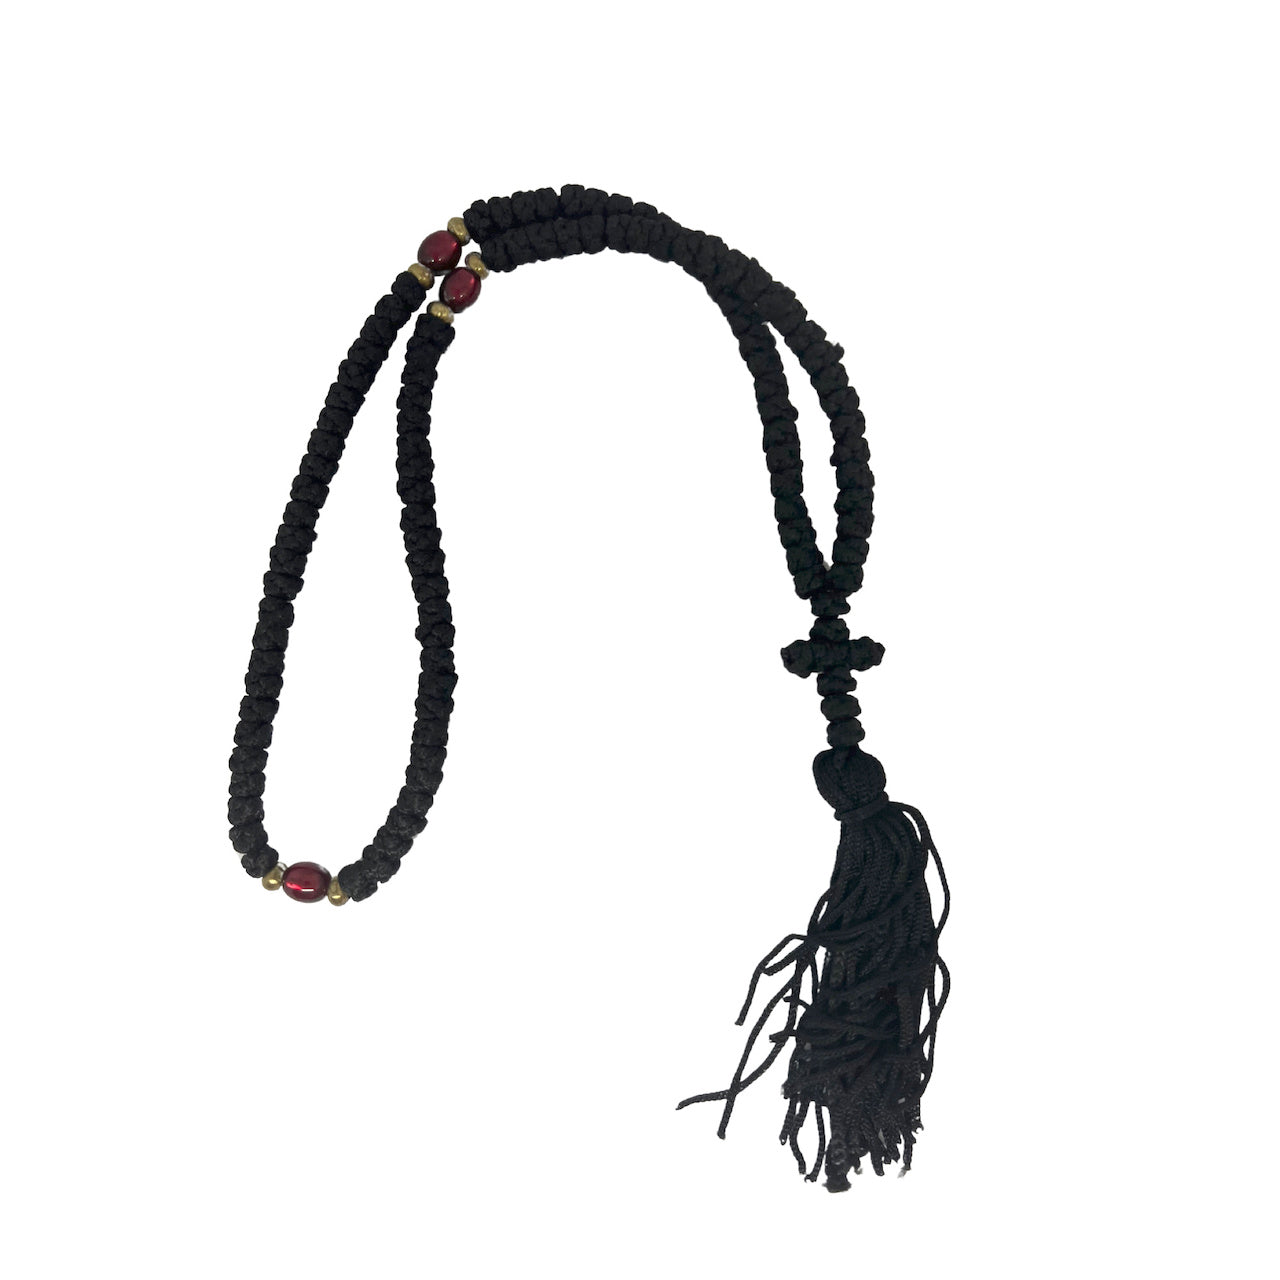 100 knots Greek Orthodox Christian Prayer Rope with Blue and red Decor –